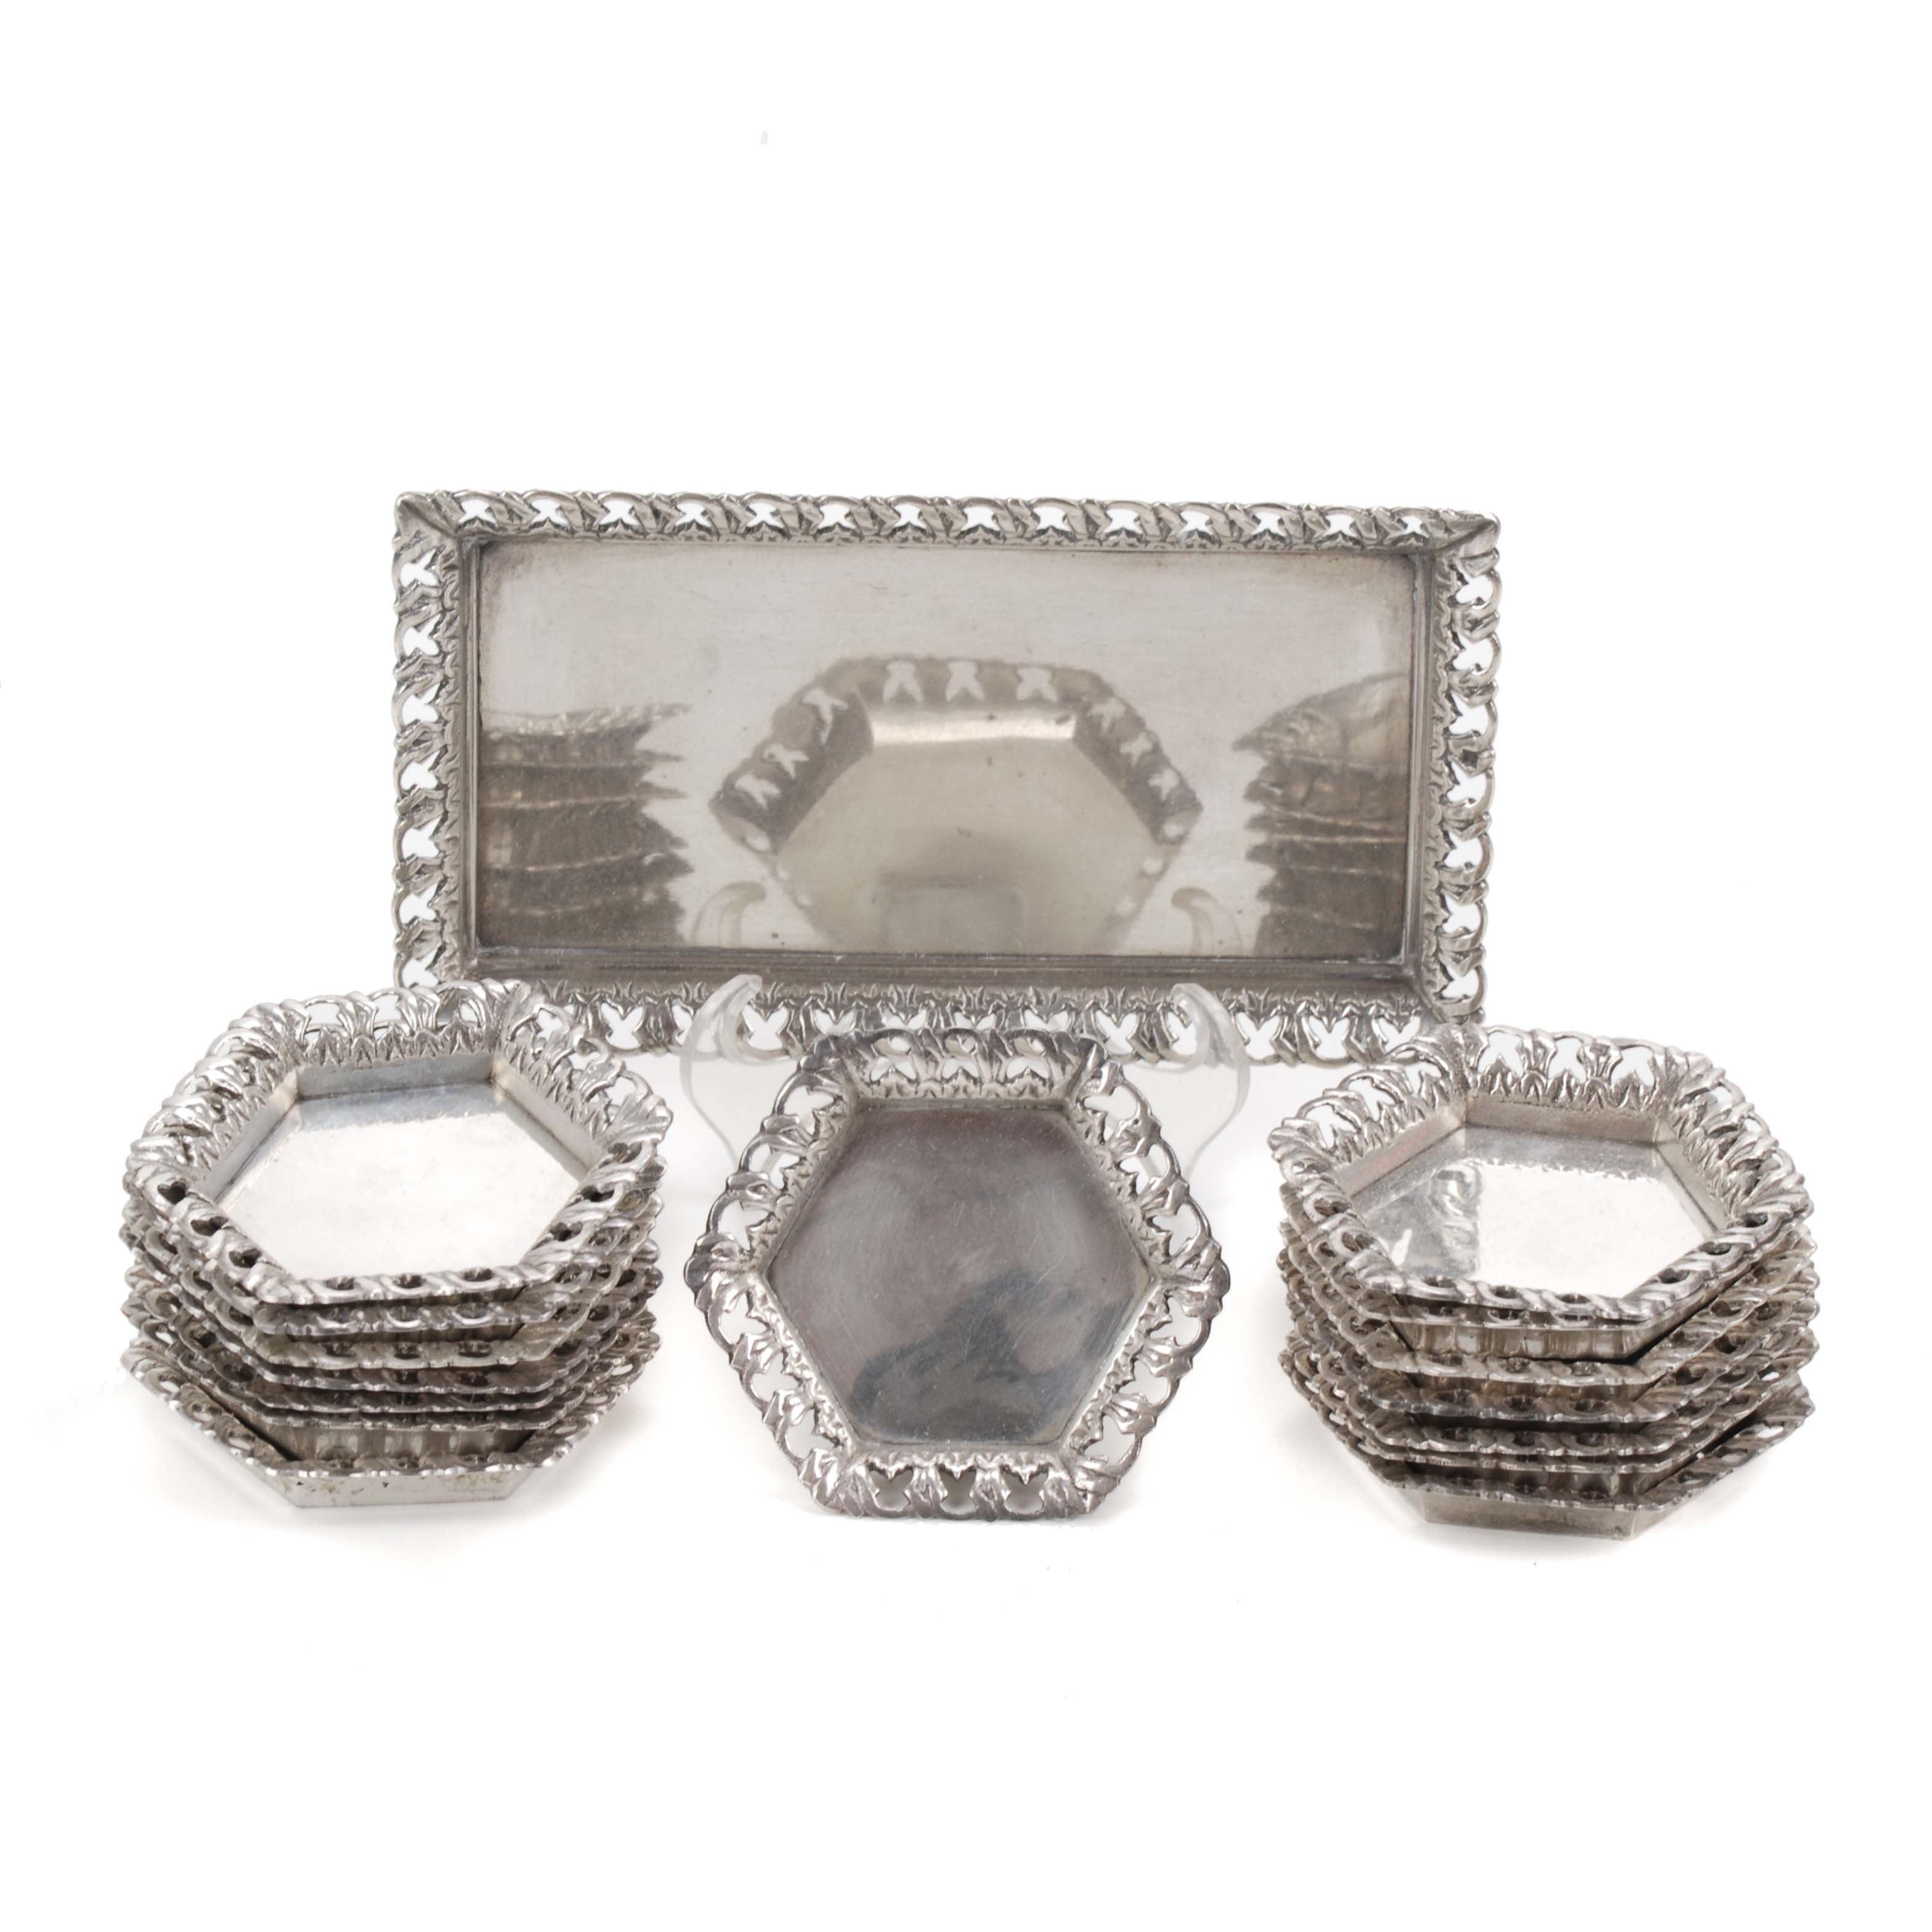 SET OF FIFTEEN SMALL PLATES AND A TRAY, EGYPTIAN SILVER. 